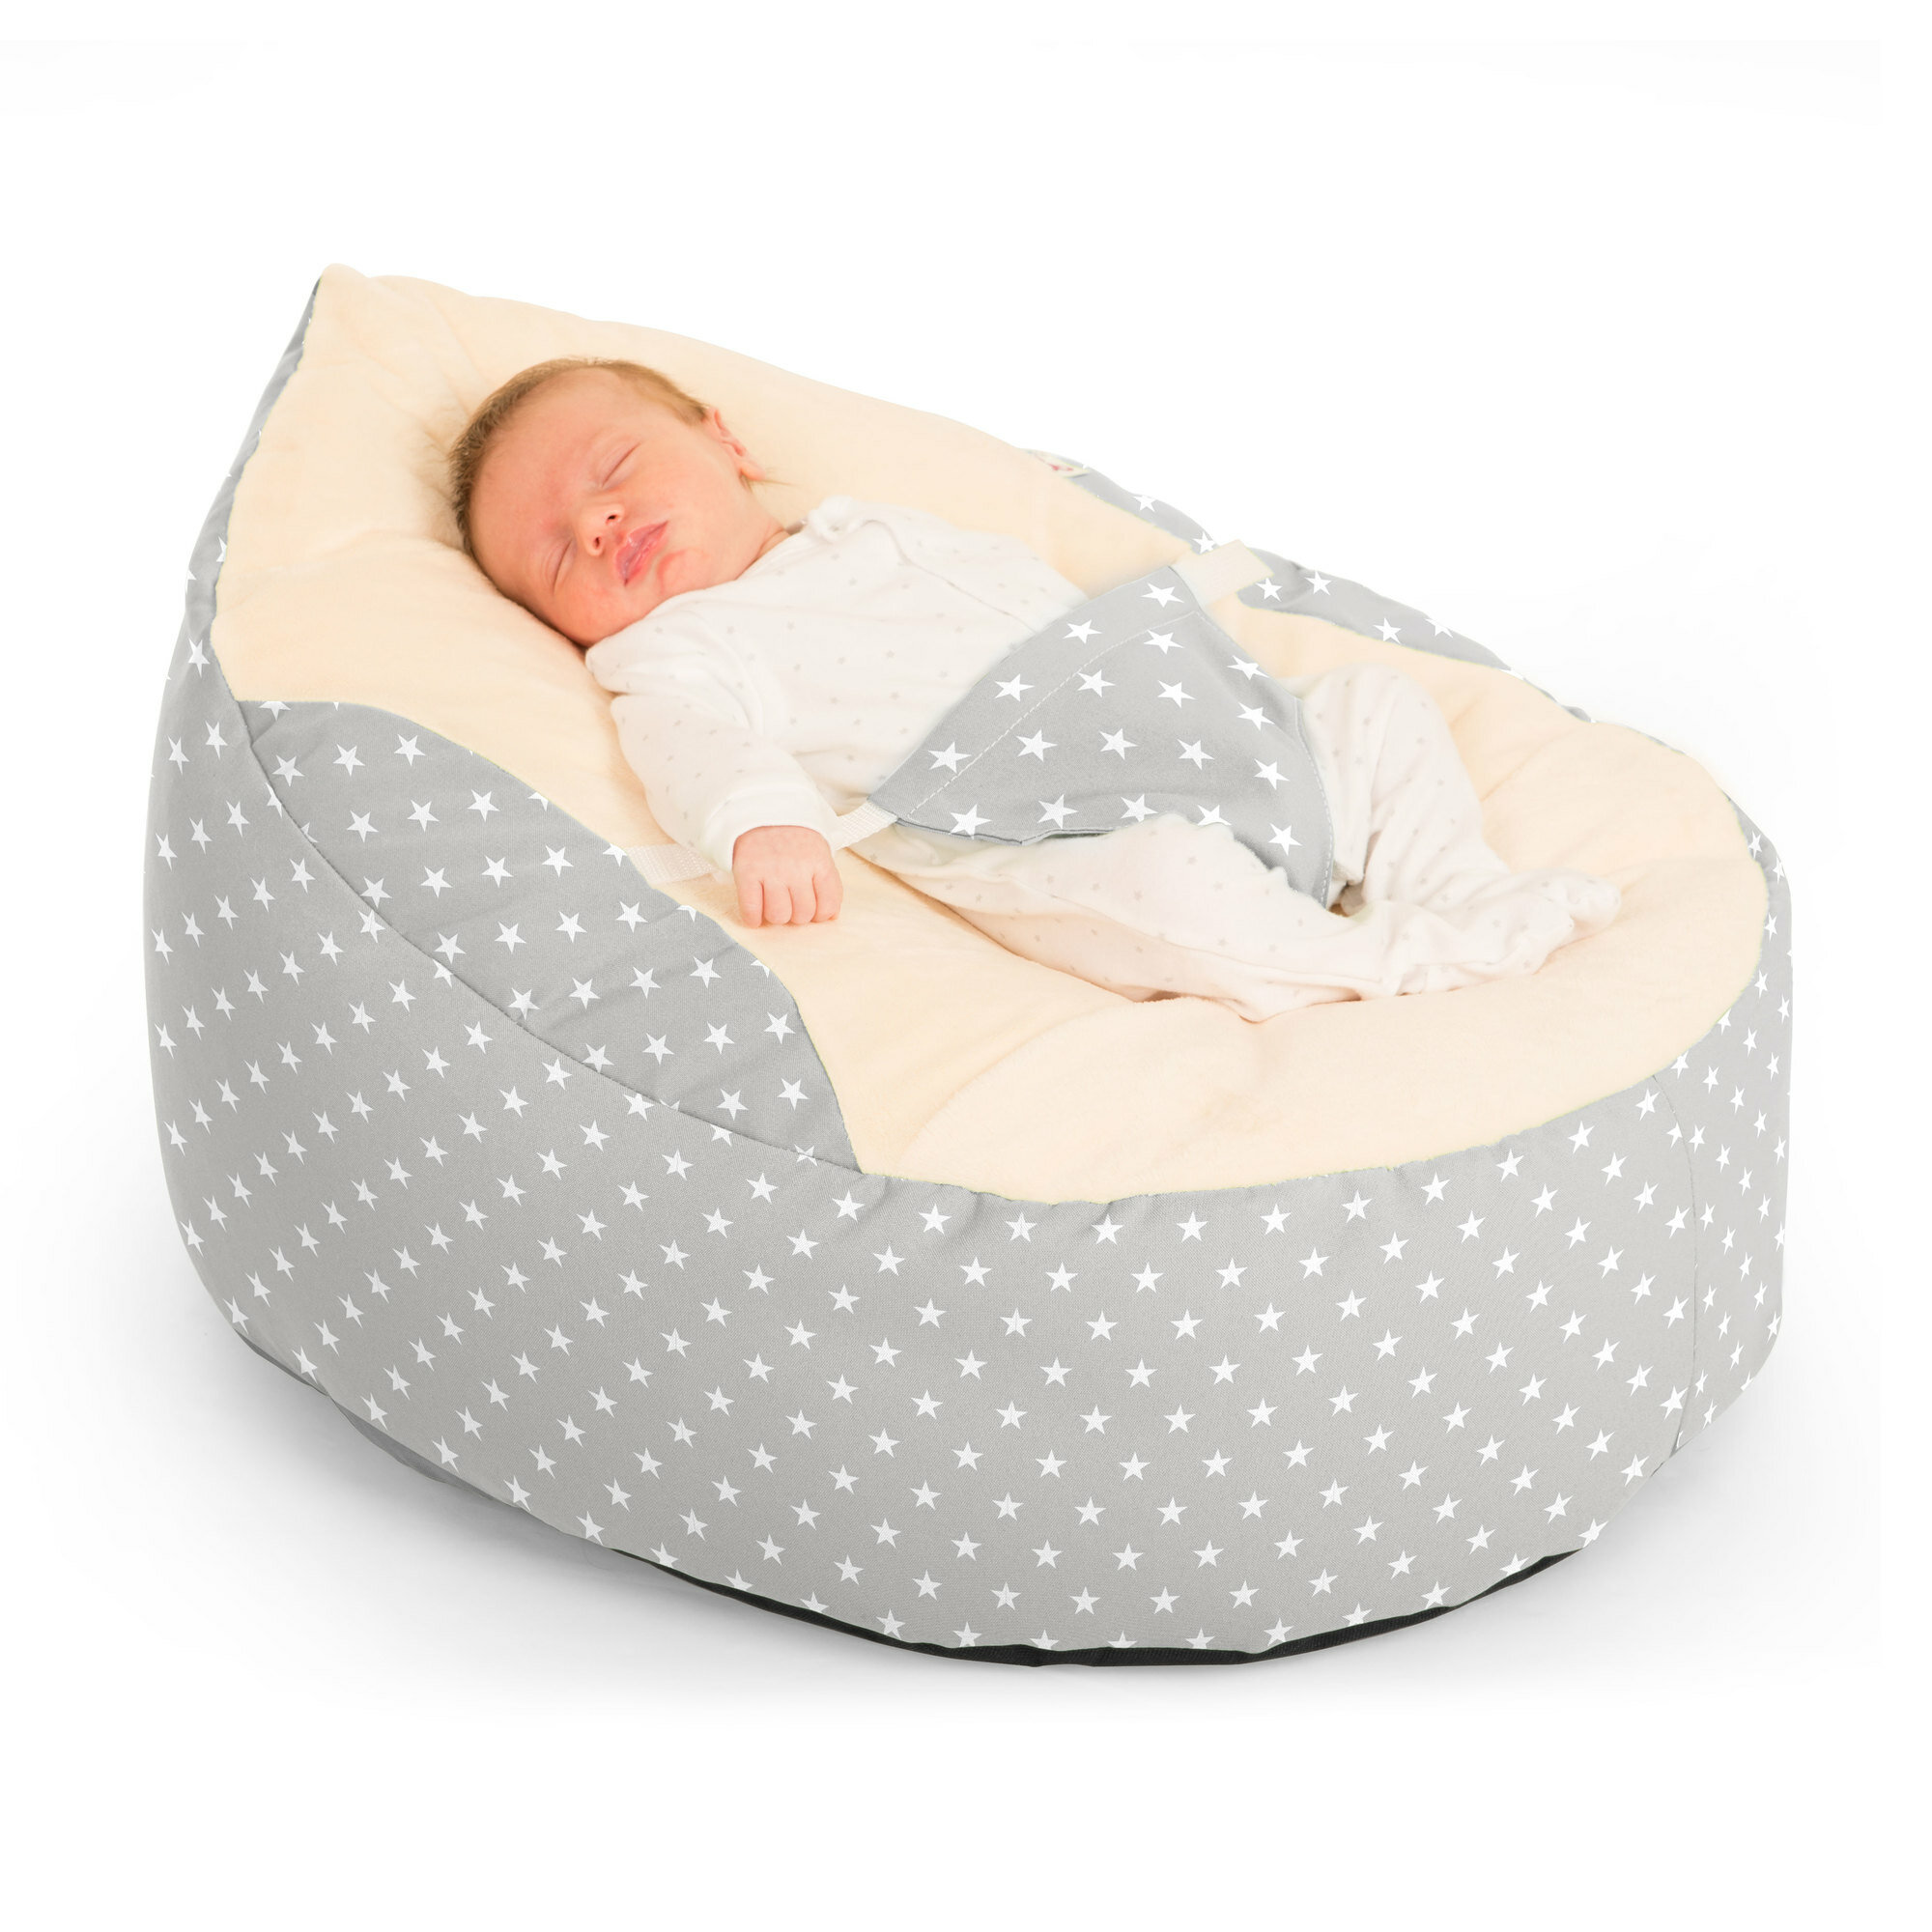 uppababy vista without bassinet